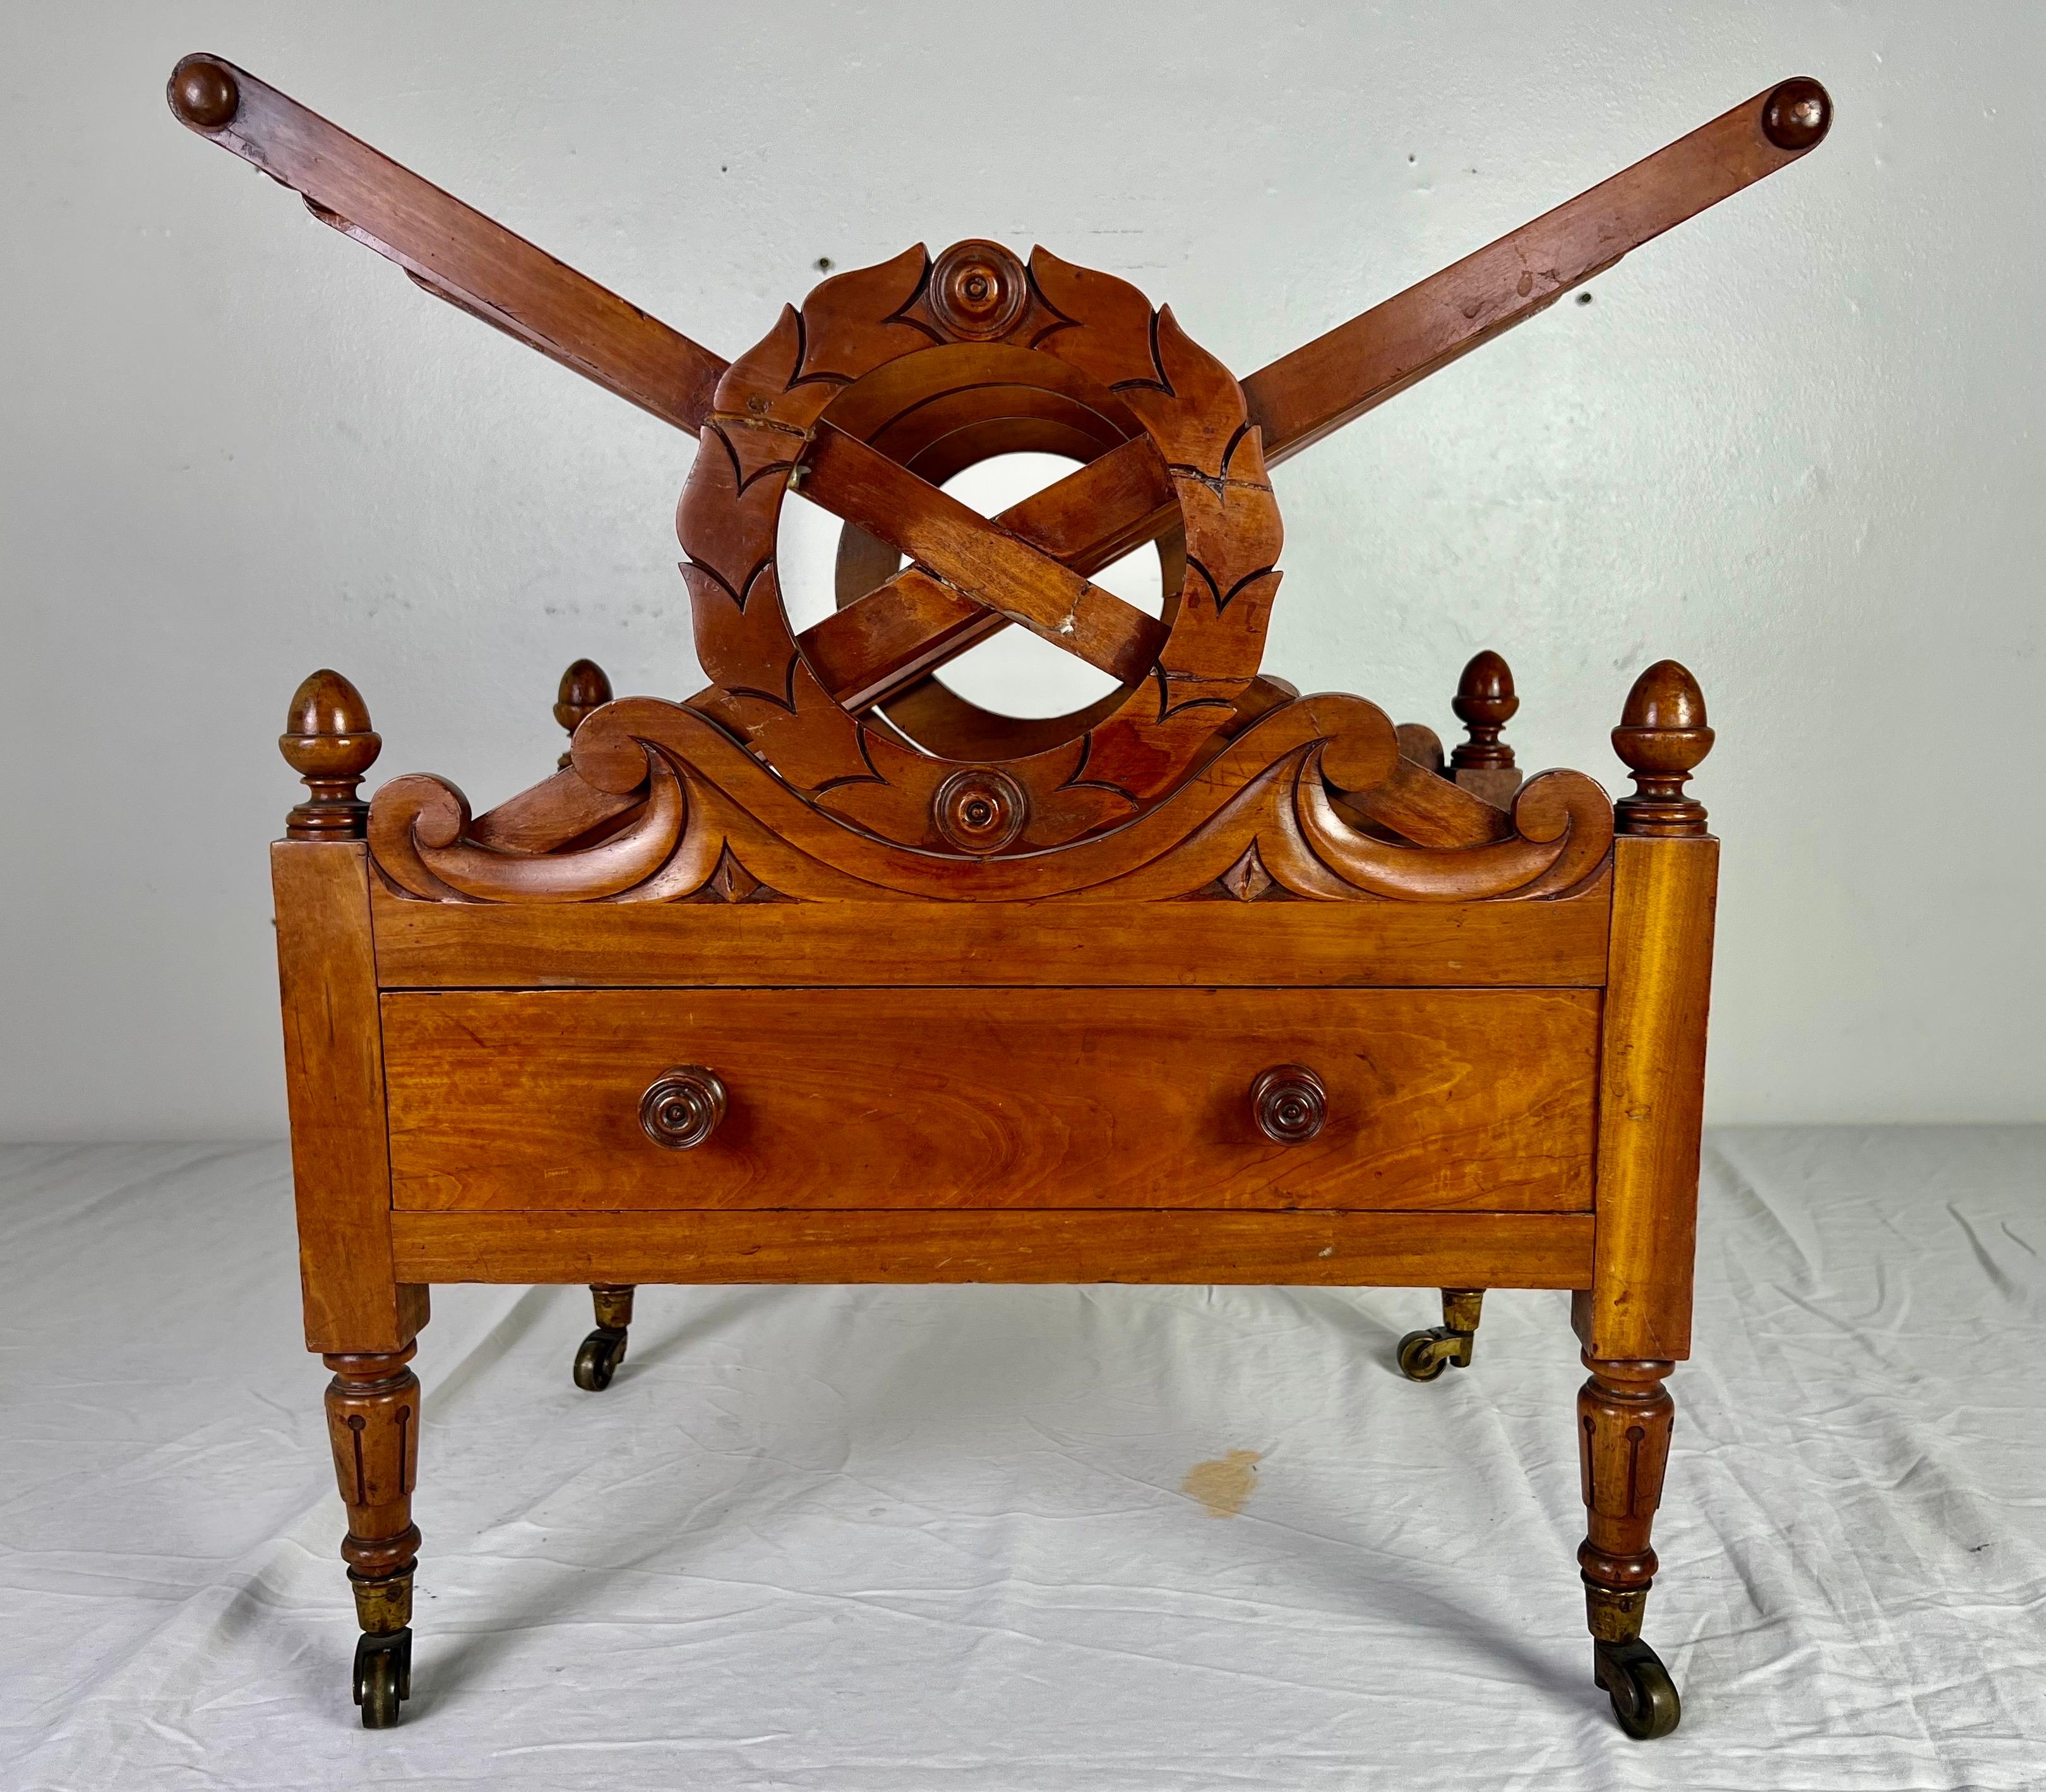 Regency 19th C. English Maple Magazine Rack w/ Drawer and Casters For Sale